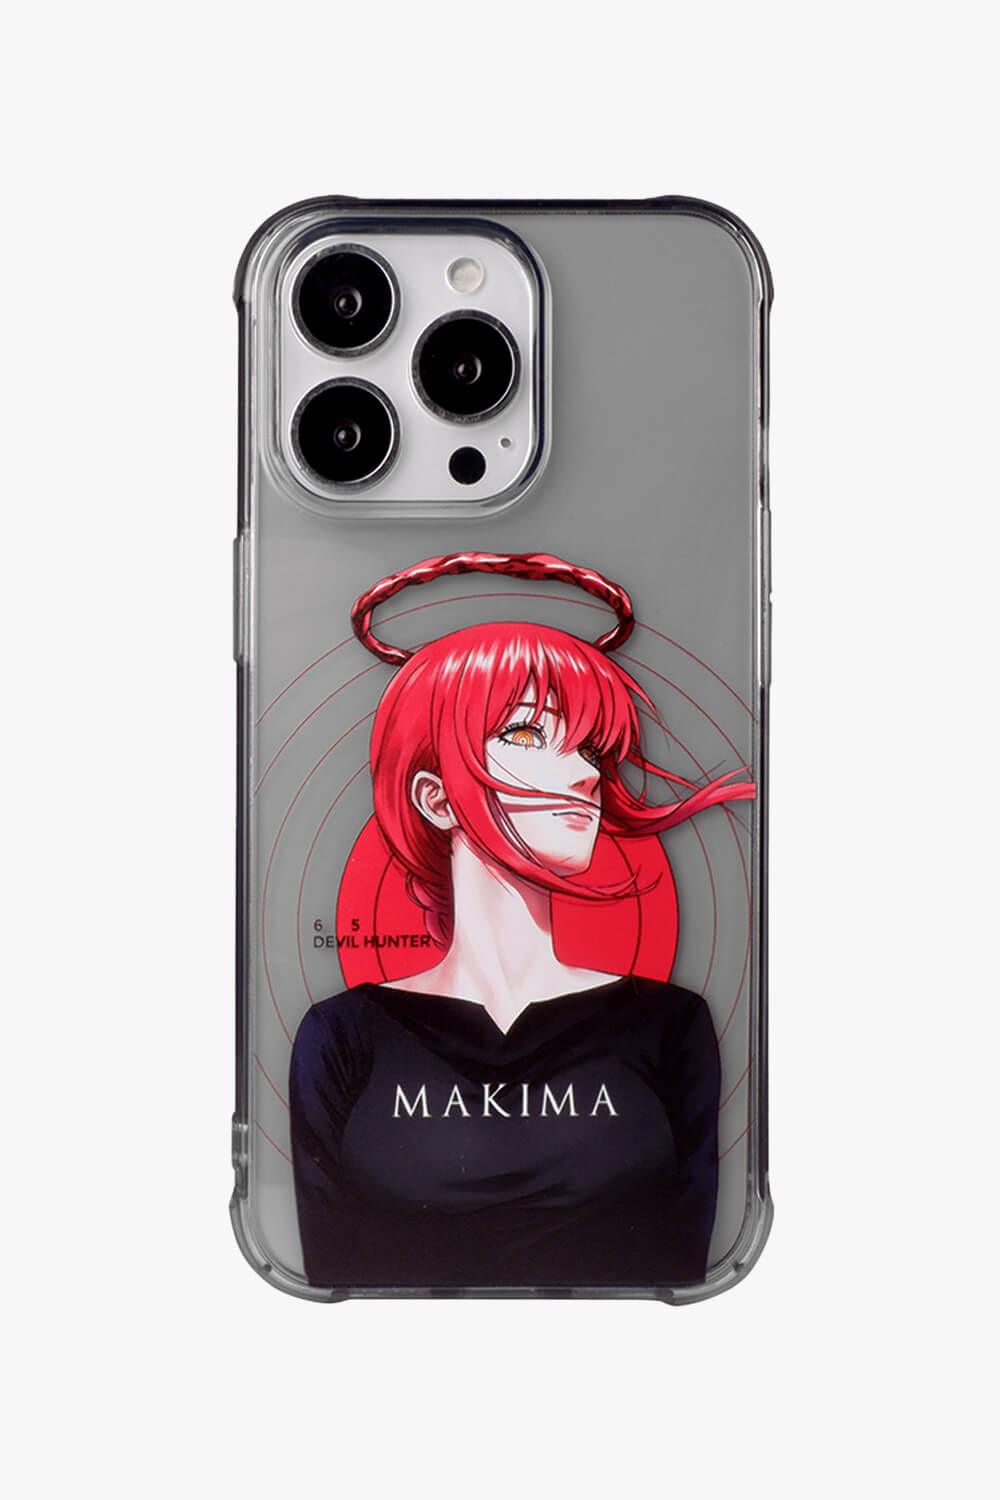 Chainsaw Man Makima Devil Hunter iPhone Case - Aesthetic Clothes Shop